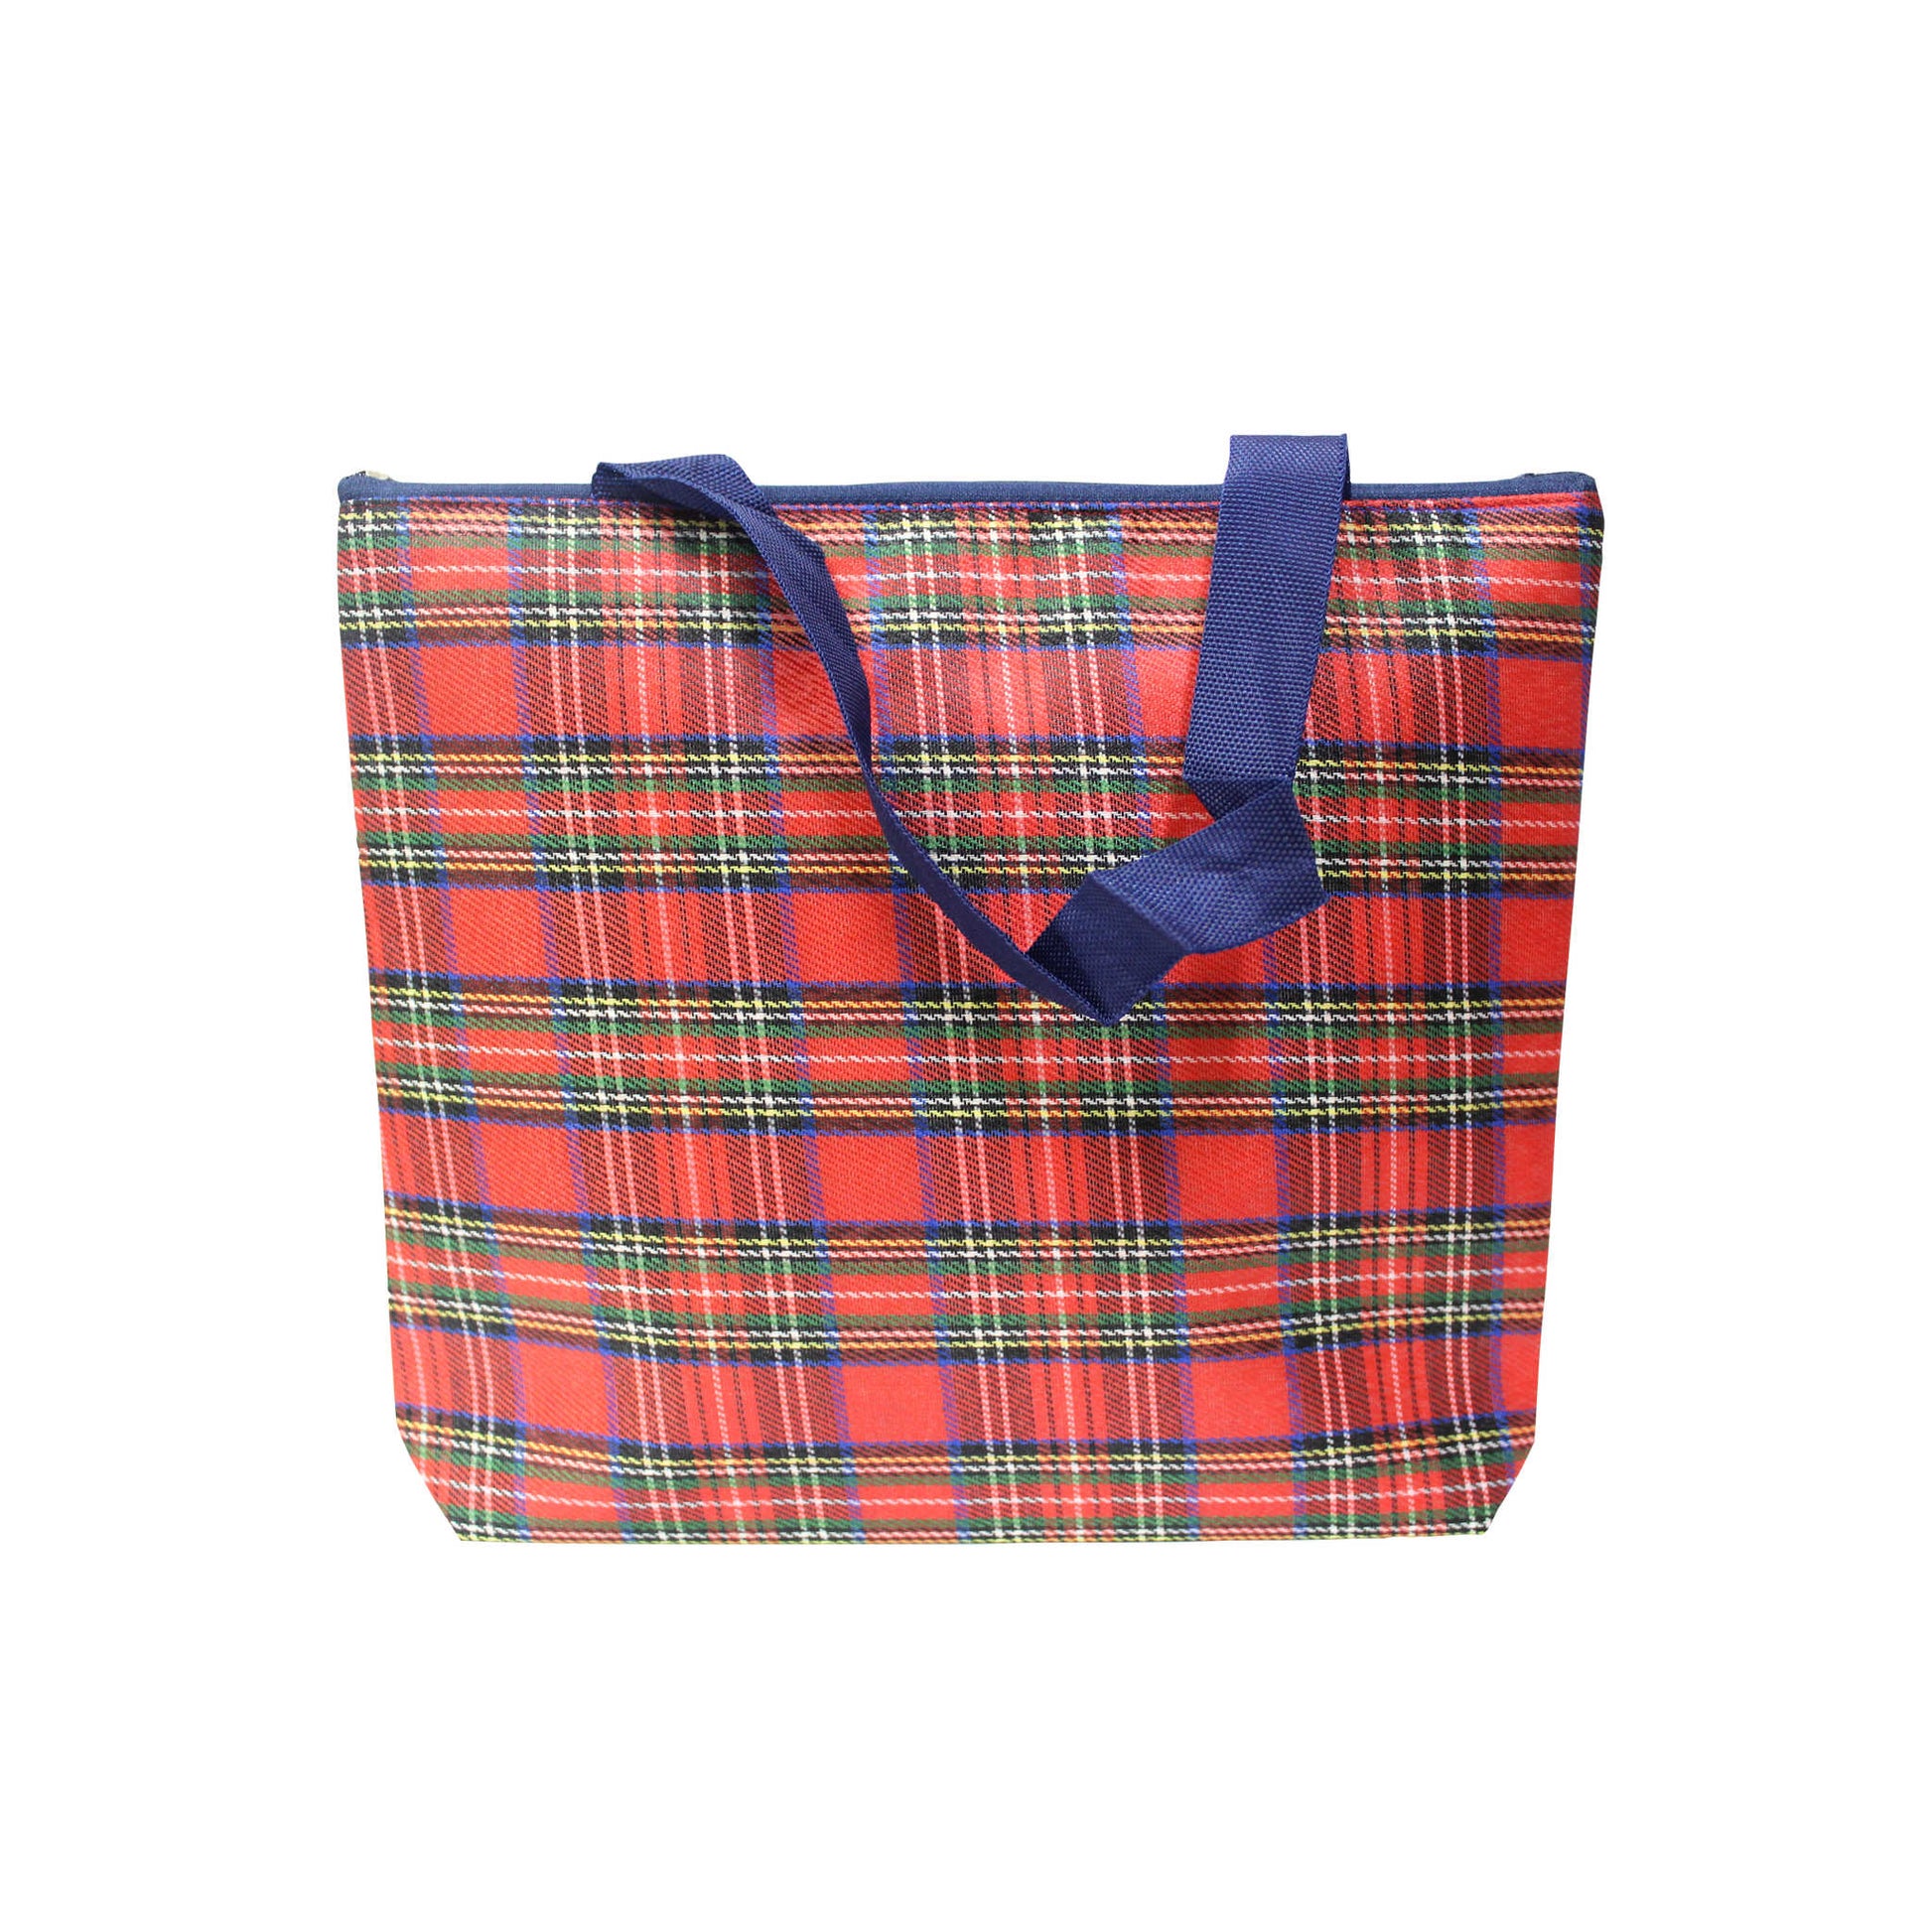 Indian Petals Imported Durable Canvas Printed multi purpose Bag with handles for girls and ladies, Theme Scottish Checks, Large, Navy Blue